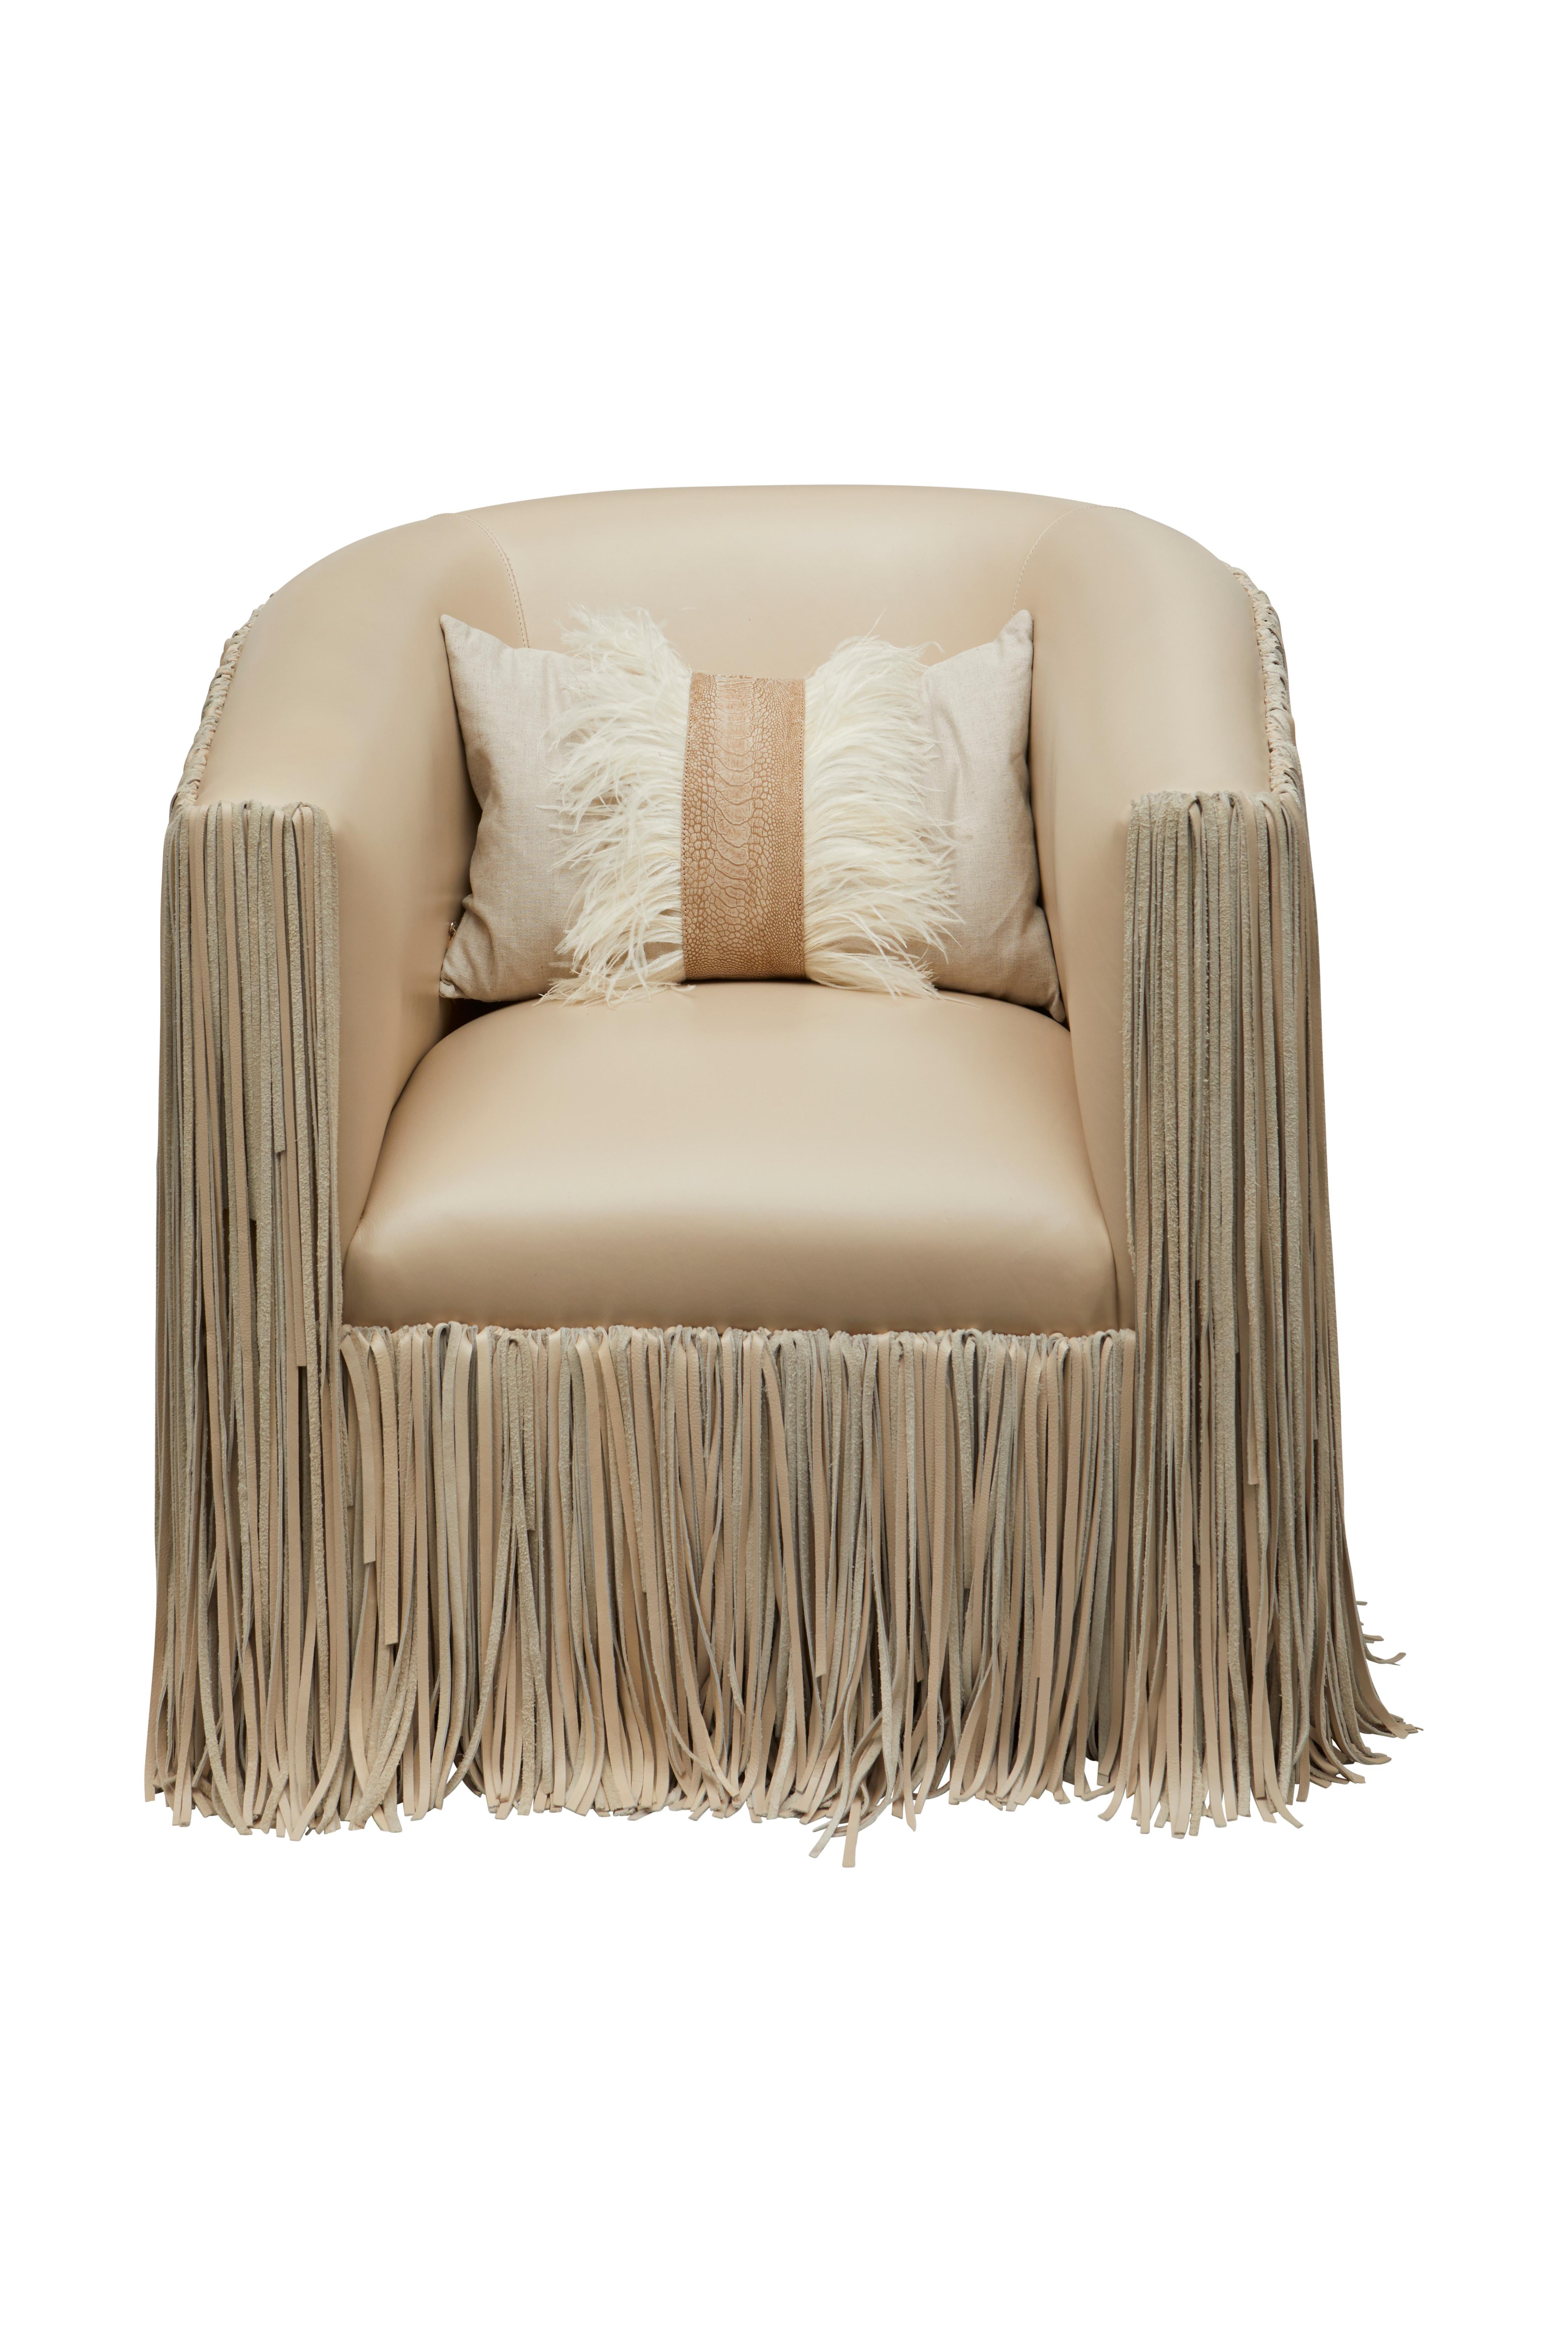 Contemporary Chair - Shaggy Leather Swivel in Cream-Stone For Sale